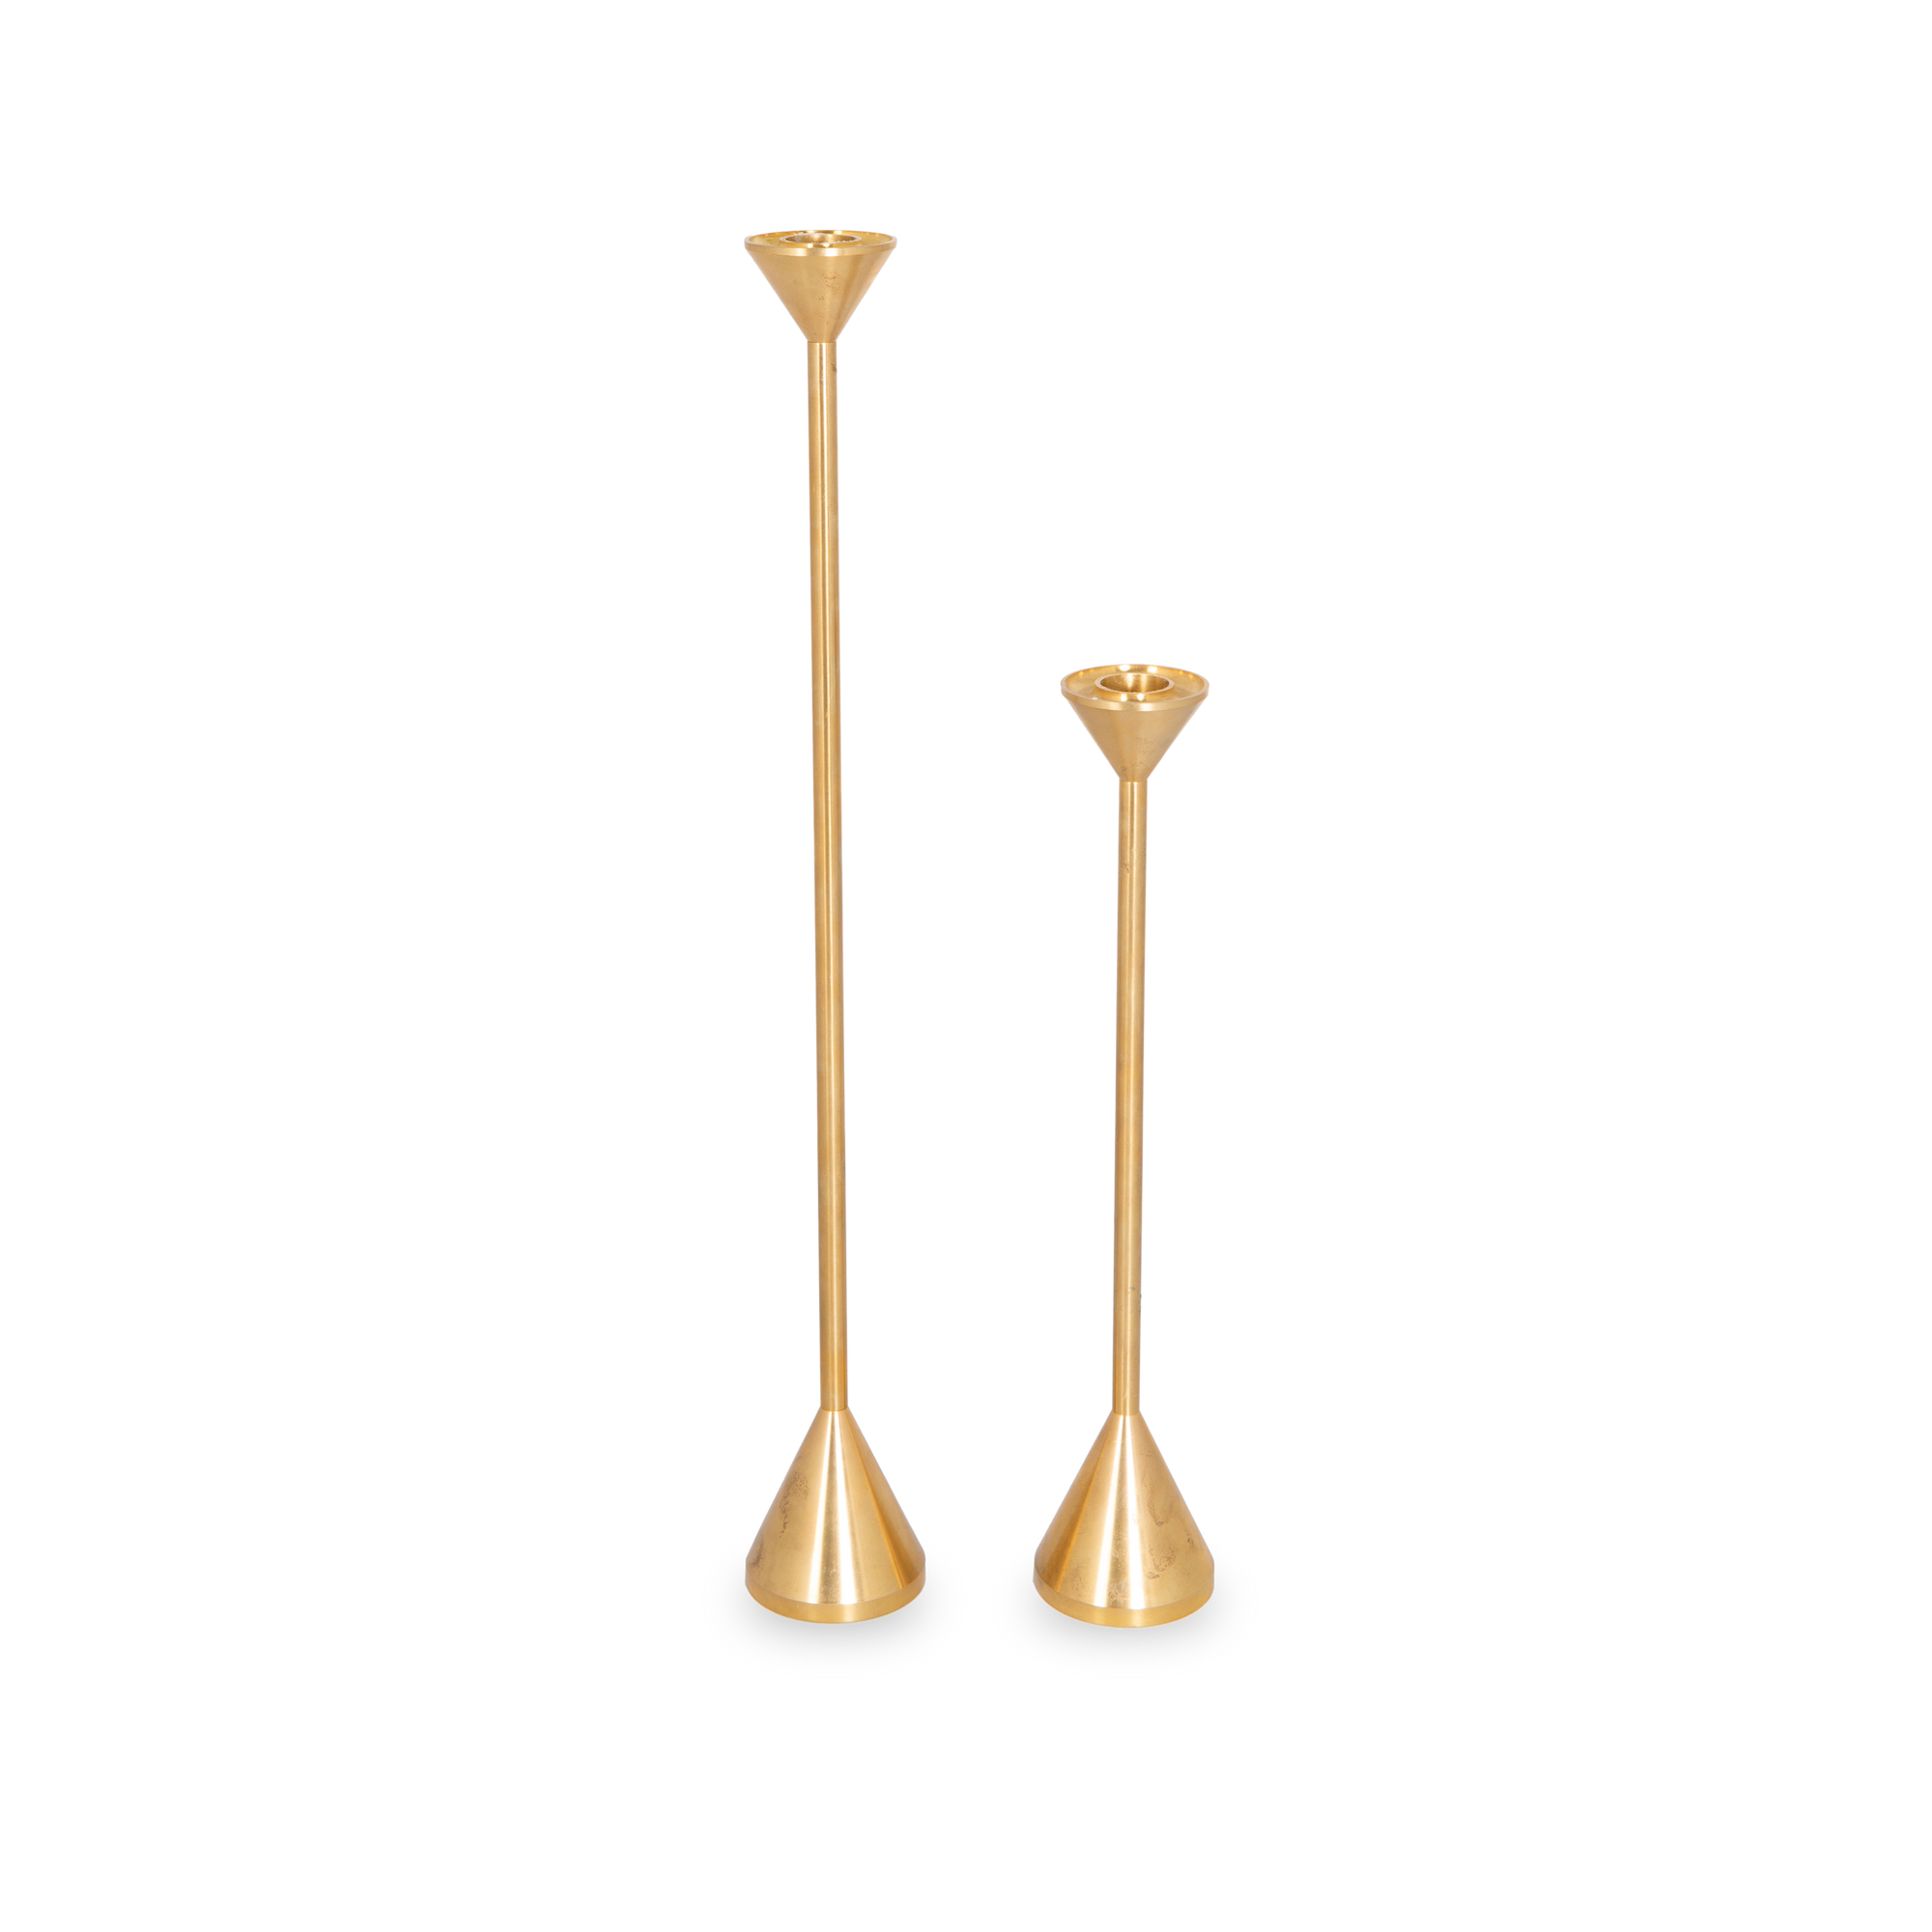 Made from solid brass, the classic spindle shape features a tall and elegant design.